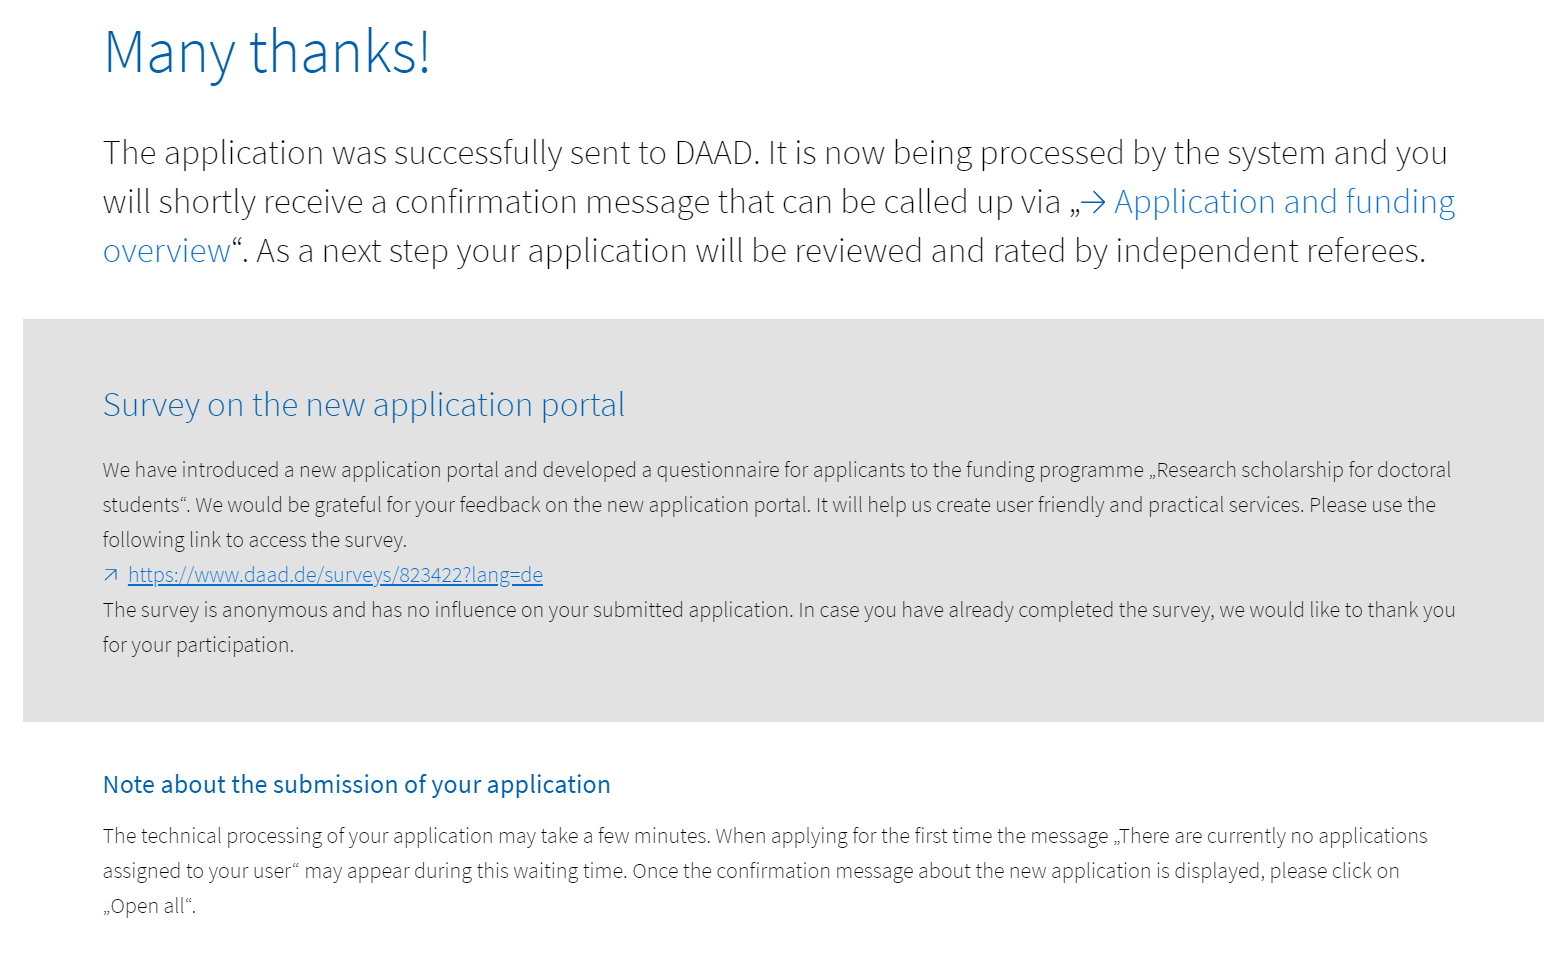 Screenshot of the confirmation window for the successful sending of the application